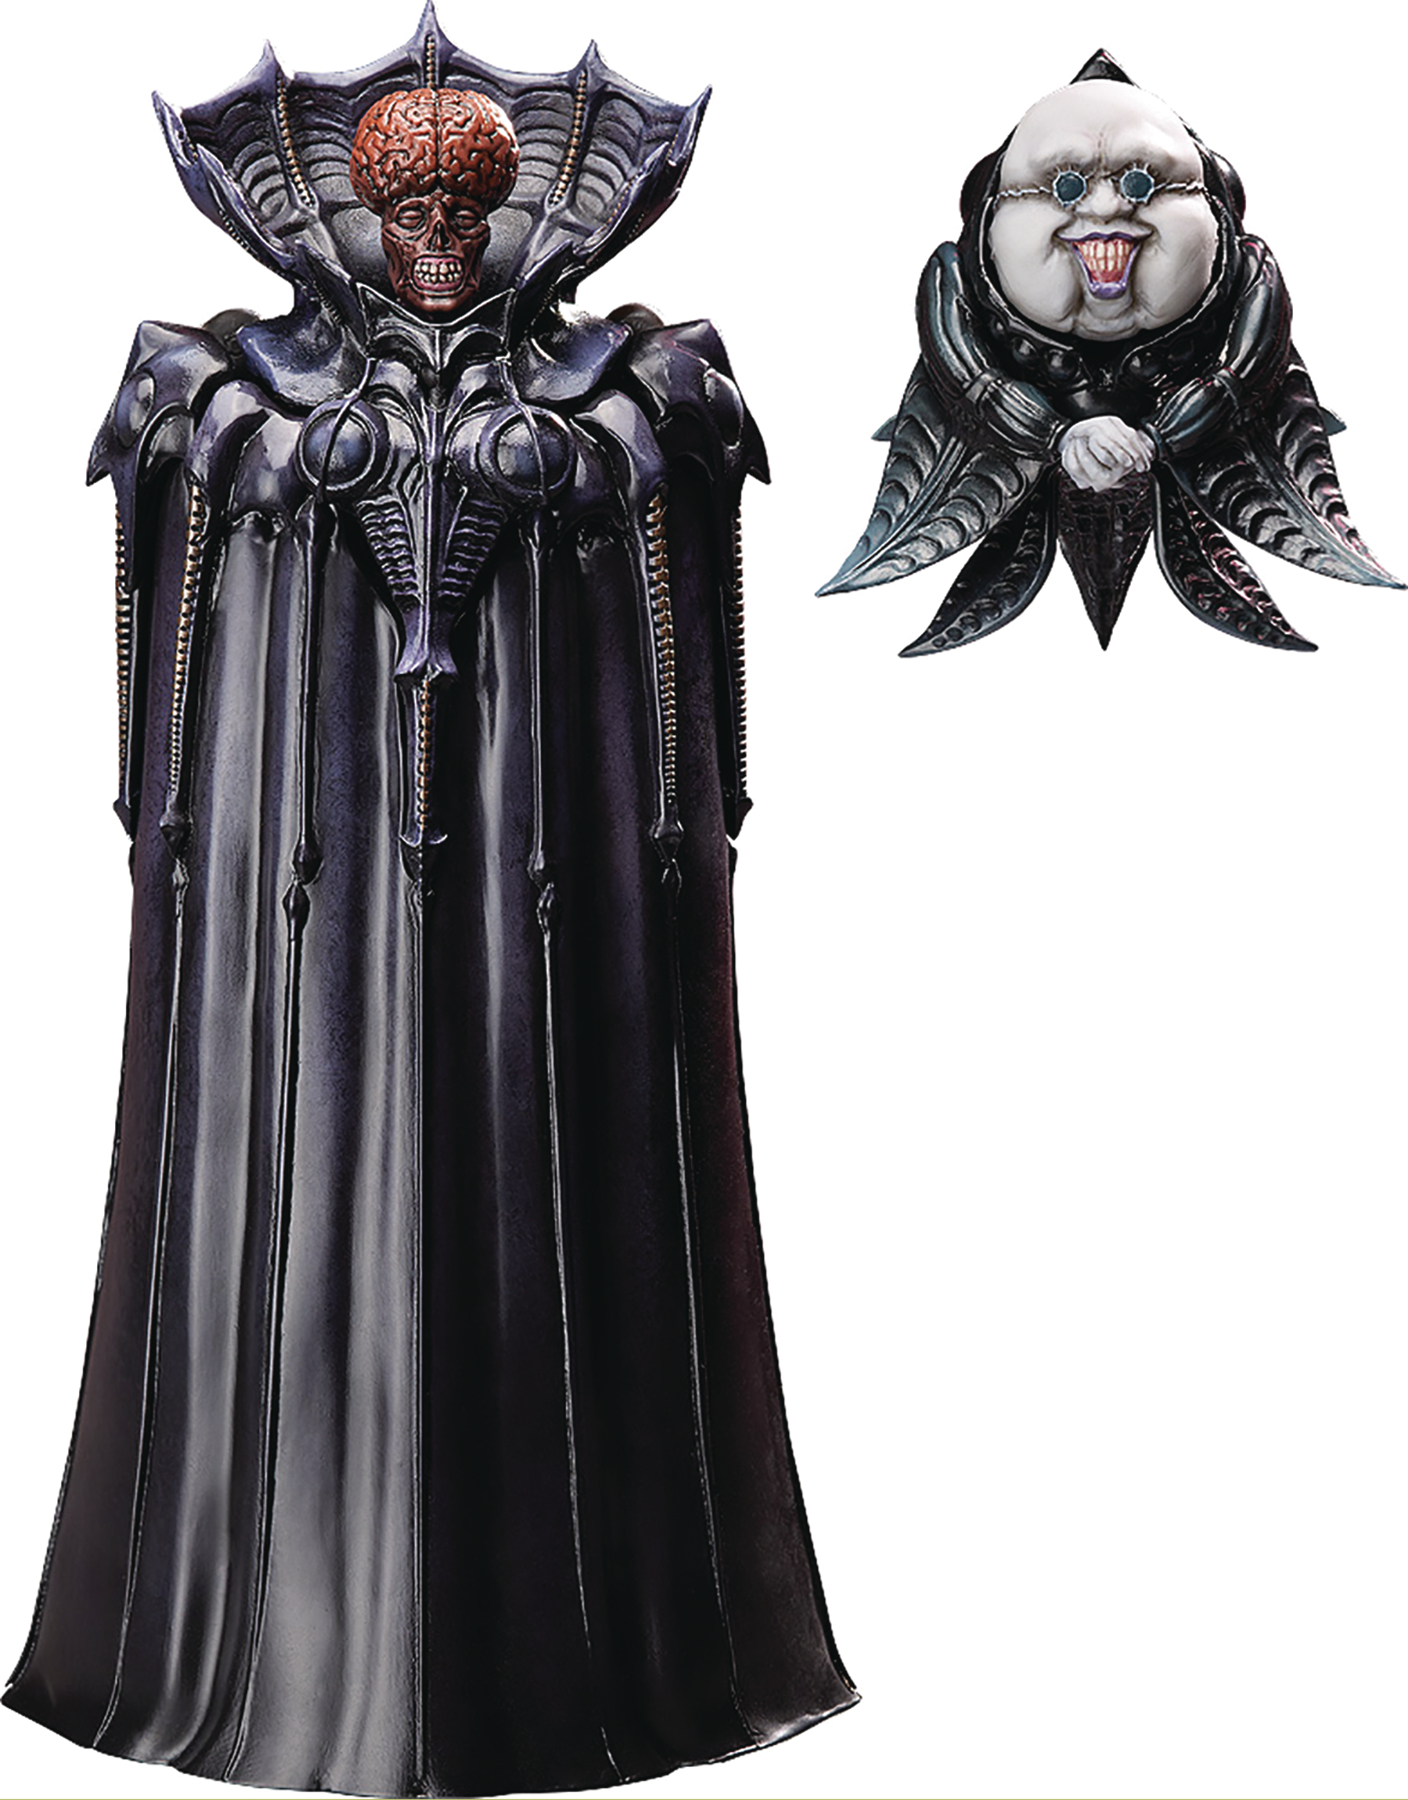 From the Berserk movie comes a figma of Void, the leader of the God Hand to...